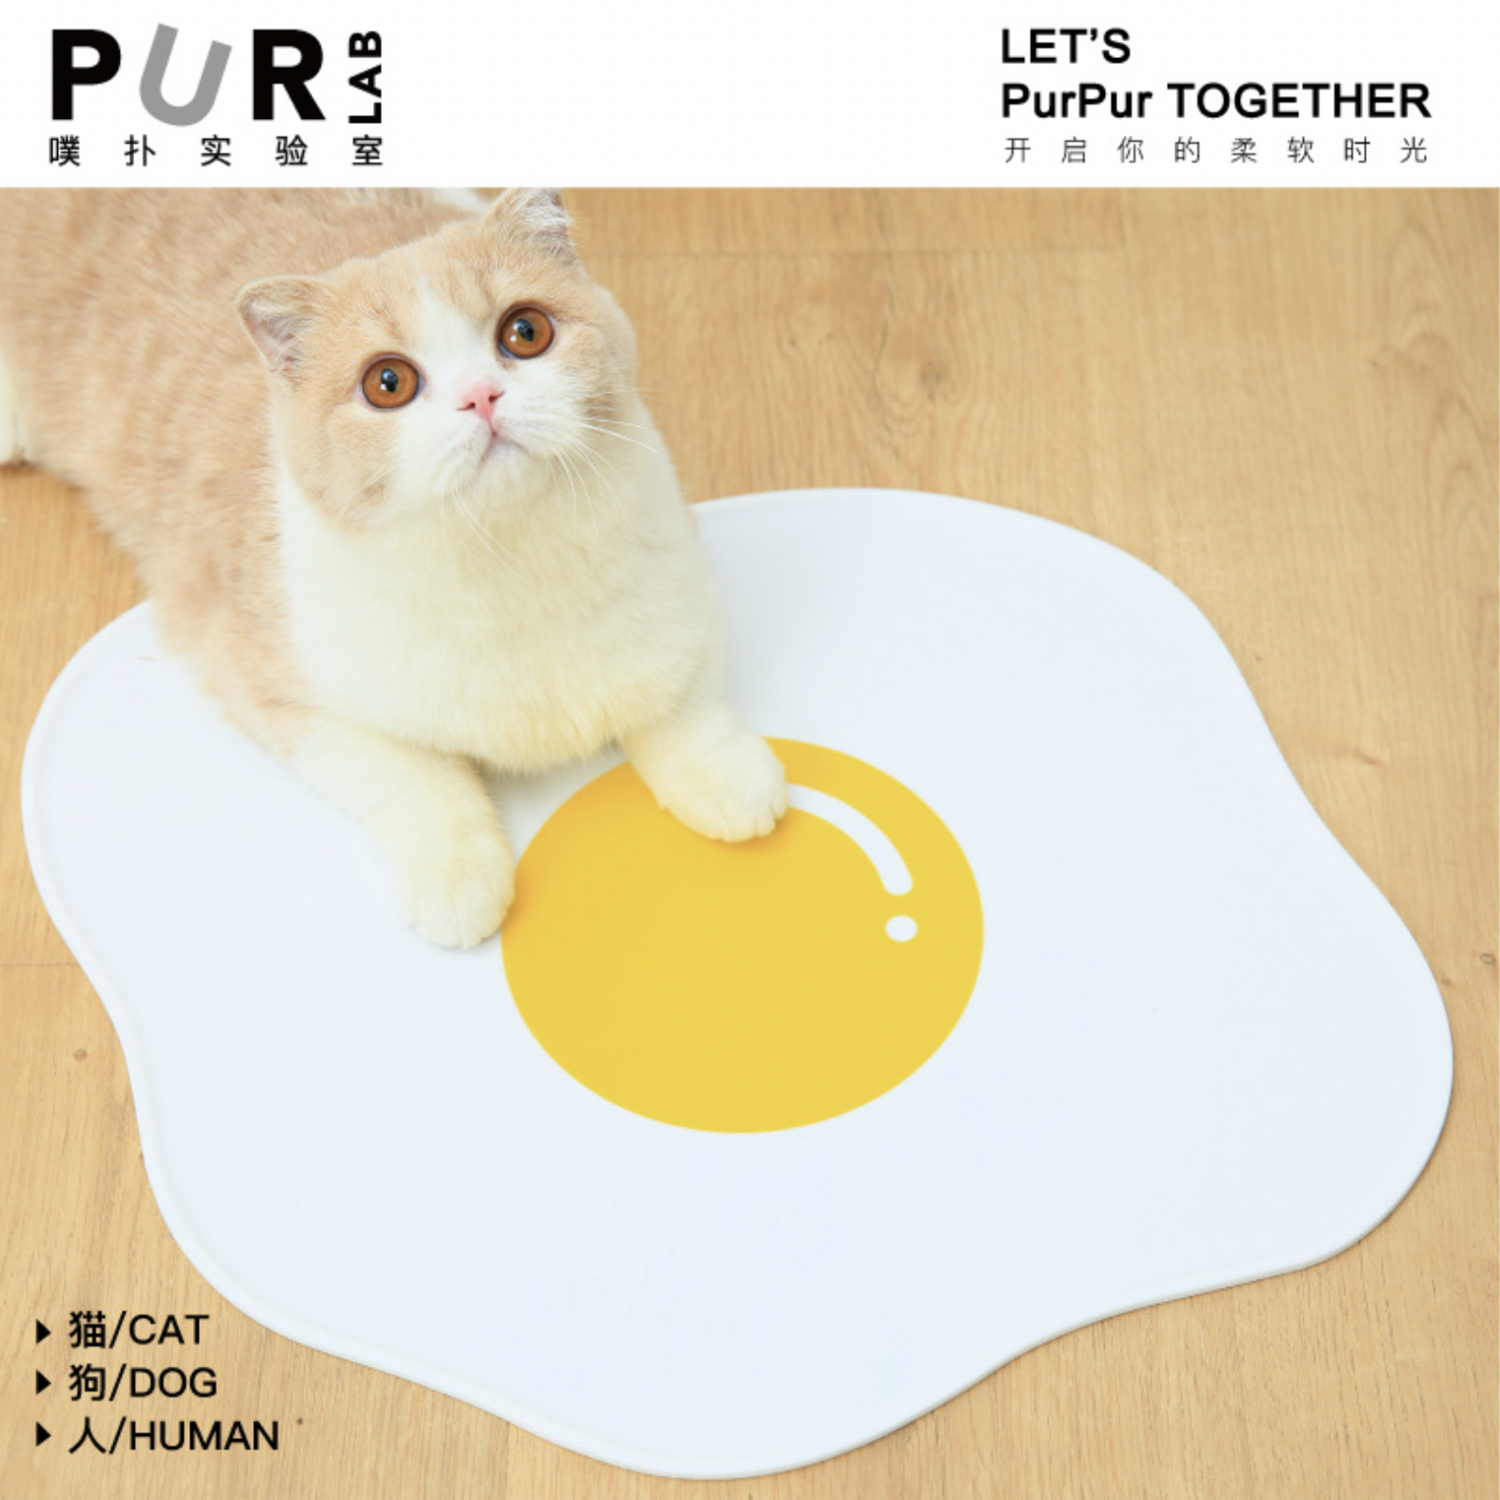 PurLab Fried Egg Silicon Mats-噗扑实验室 荷包蛋硅胶餐垫